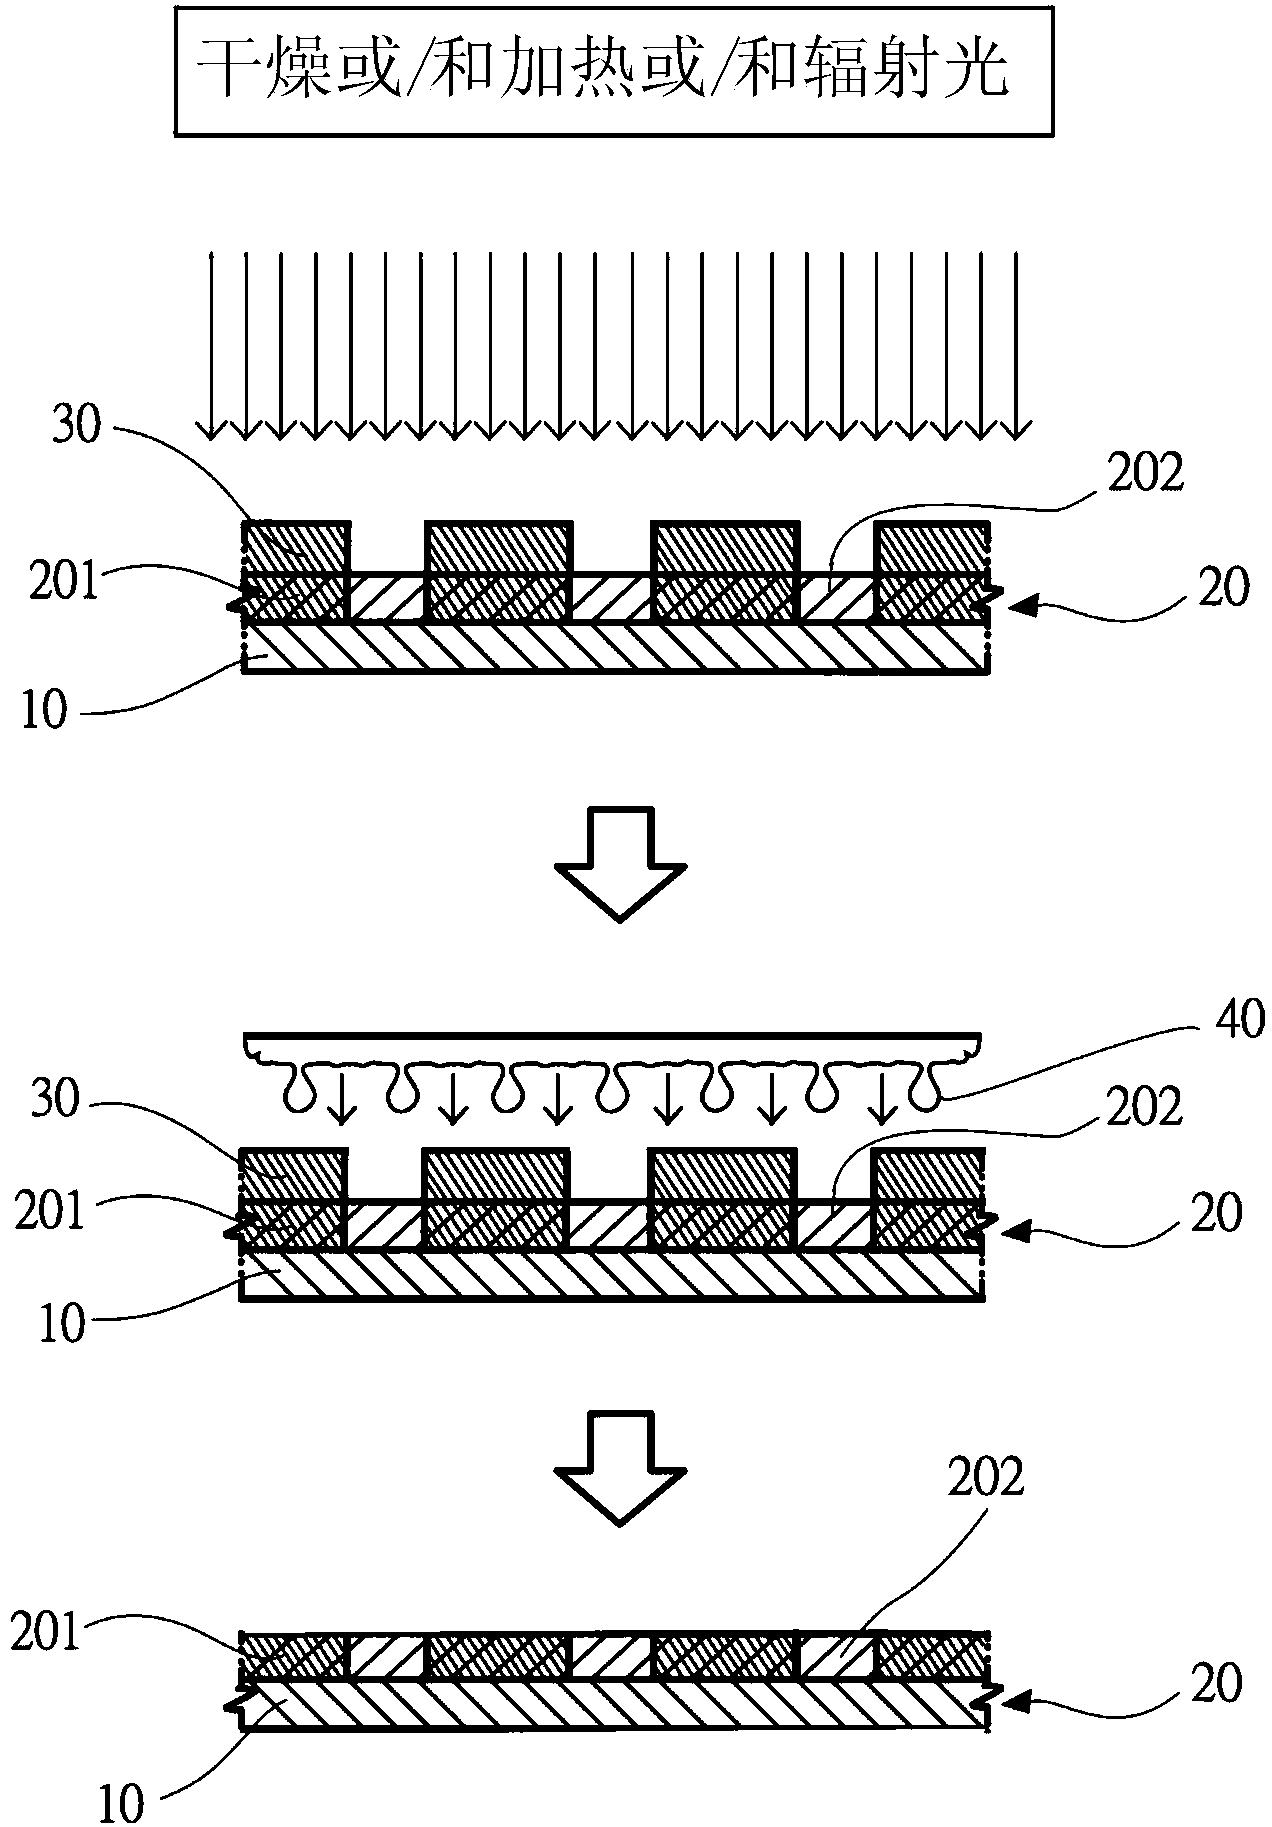 Composition Of An Aqueous Etchant Containing A Precursor Of Oxidant And Patterning Method For Conductive Circuit